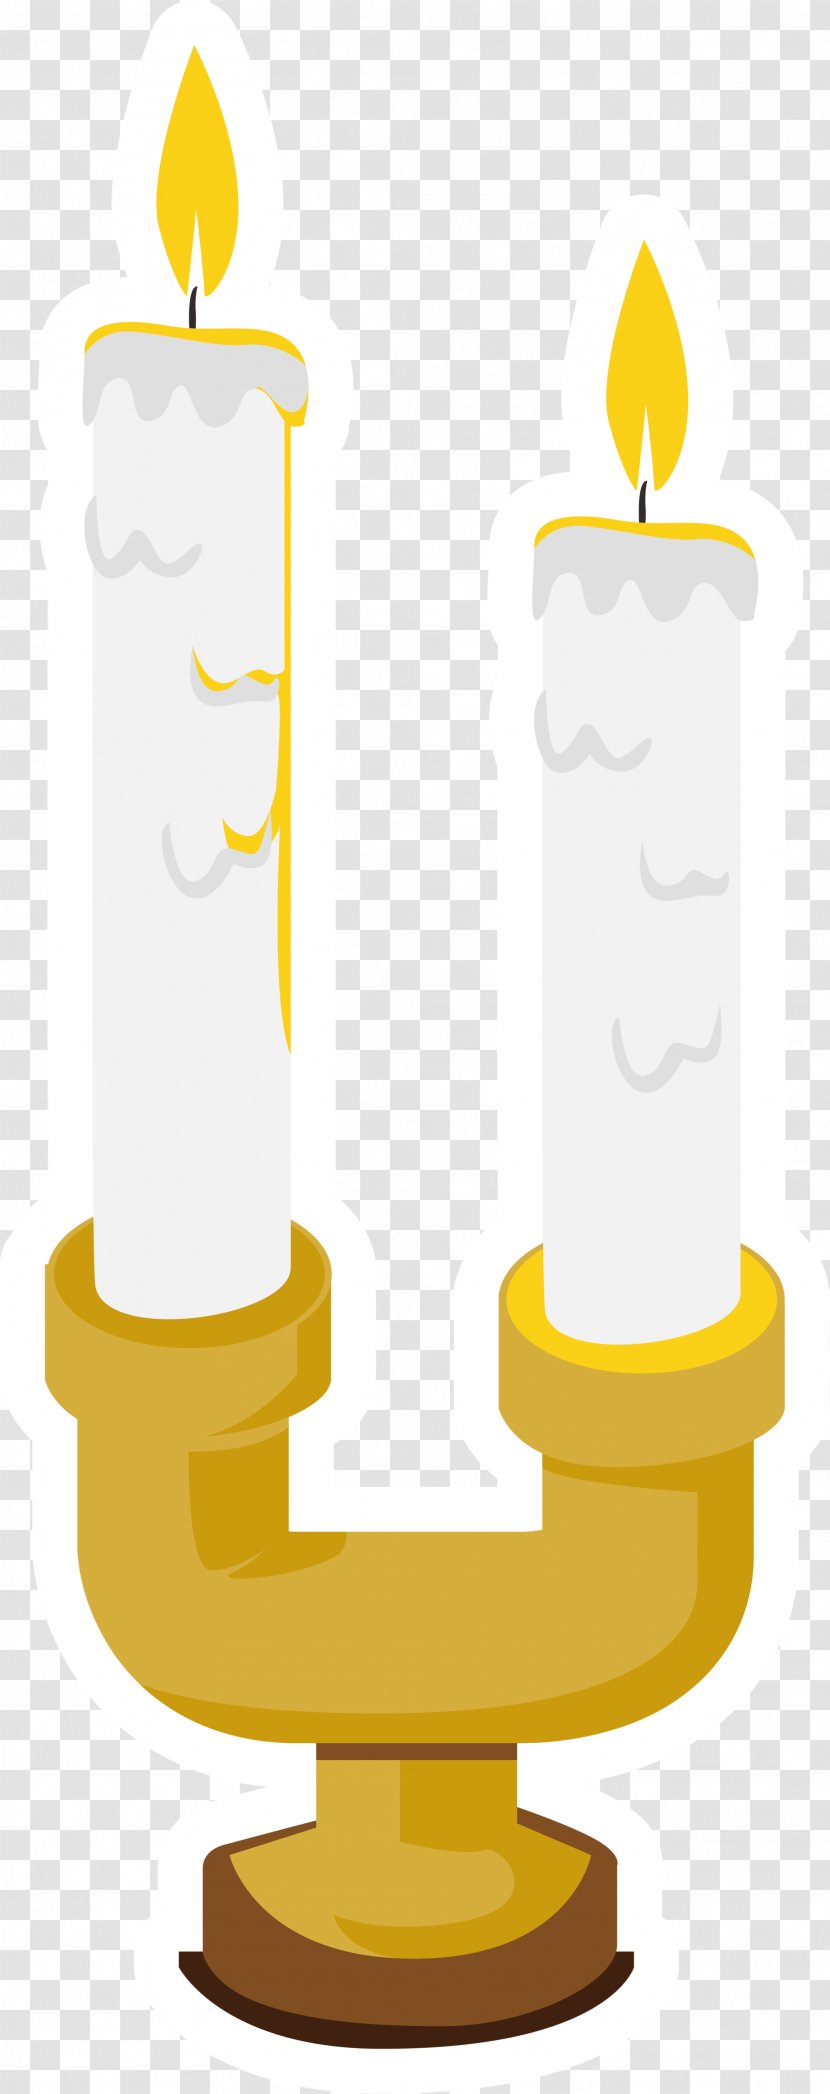 Yellow Drawing Clip Art - Household Goods - Cartoon Candle Transparent PNG